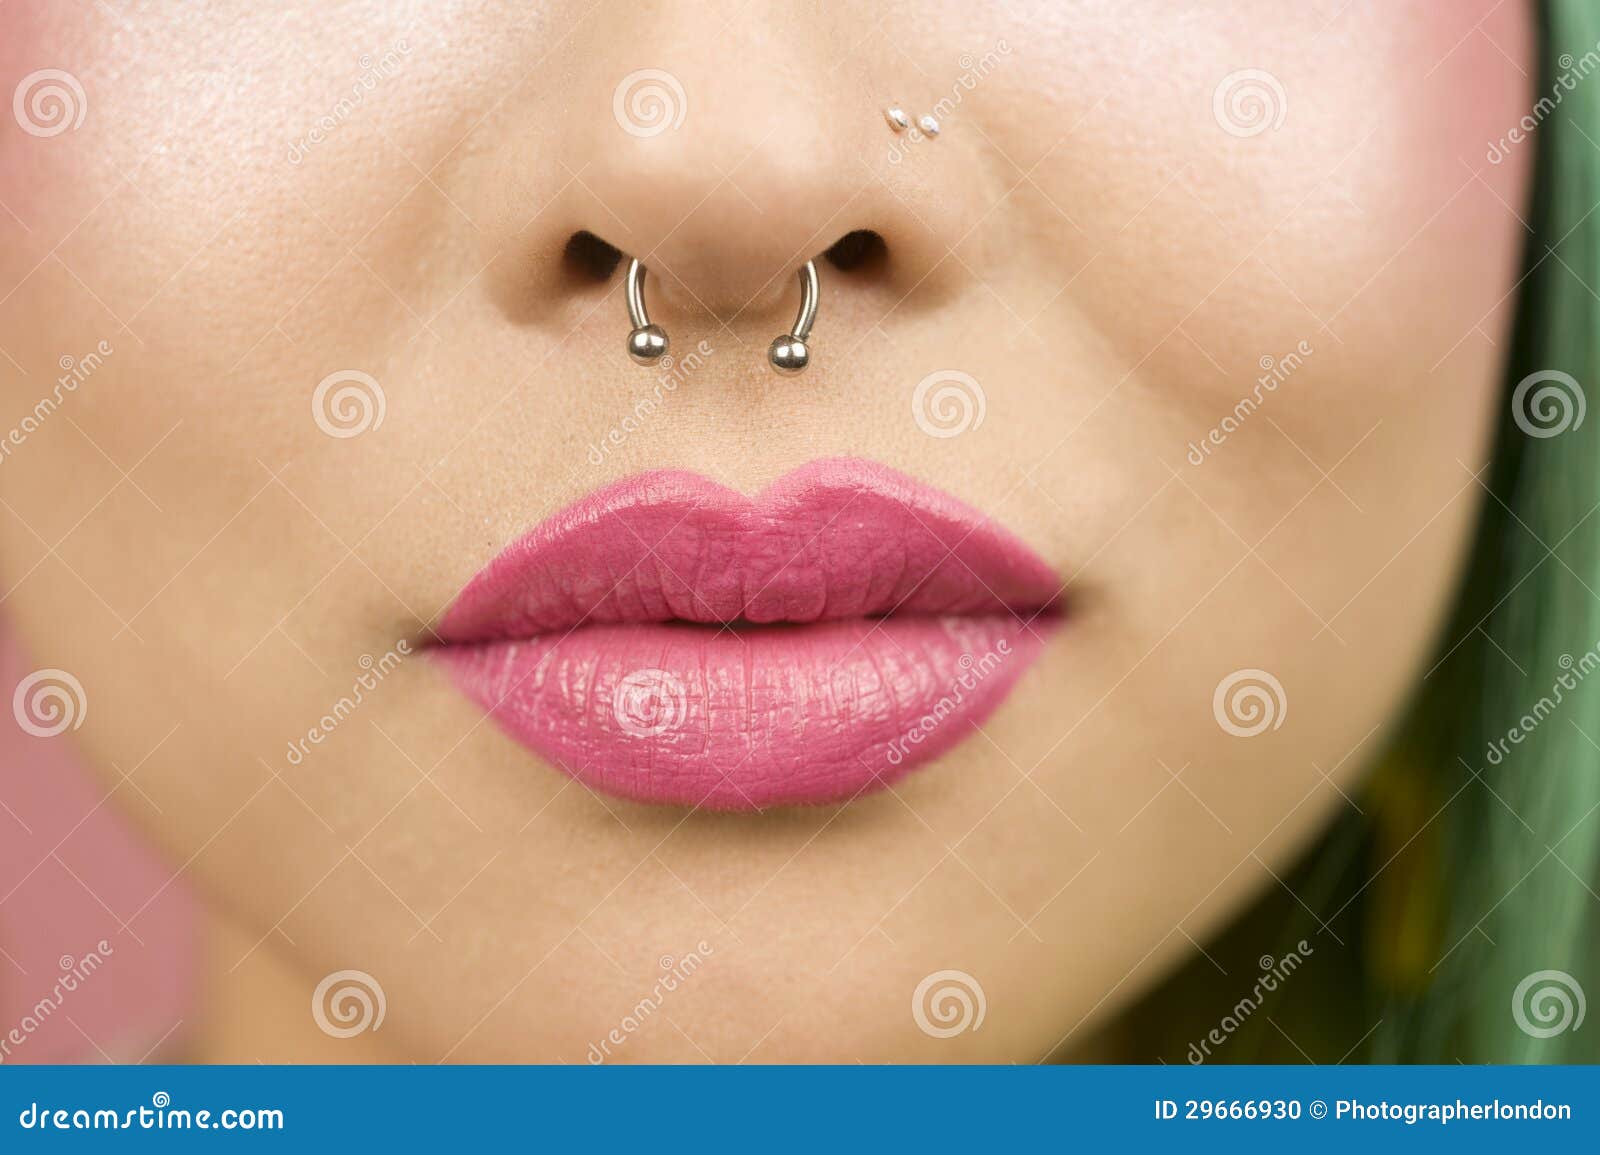 lips of young woman wearing pink lipstick